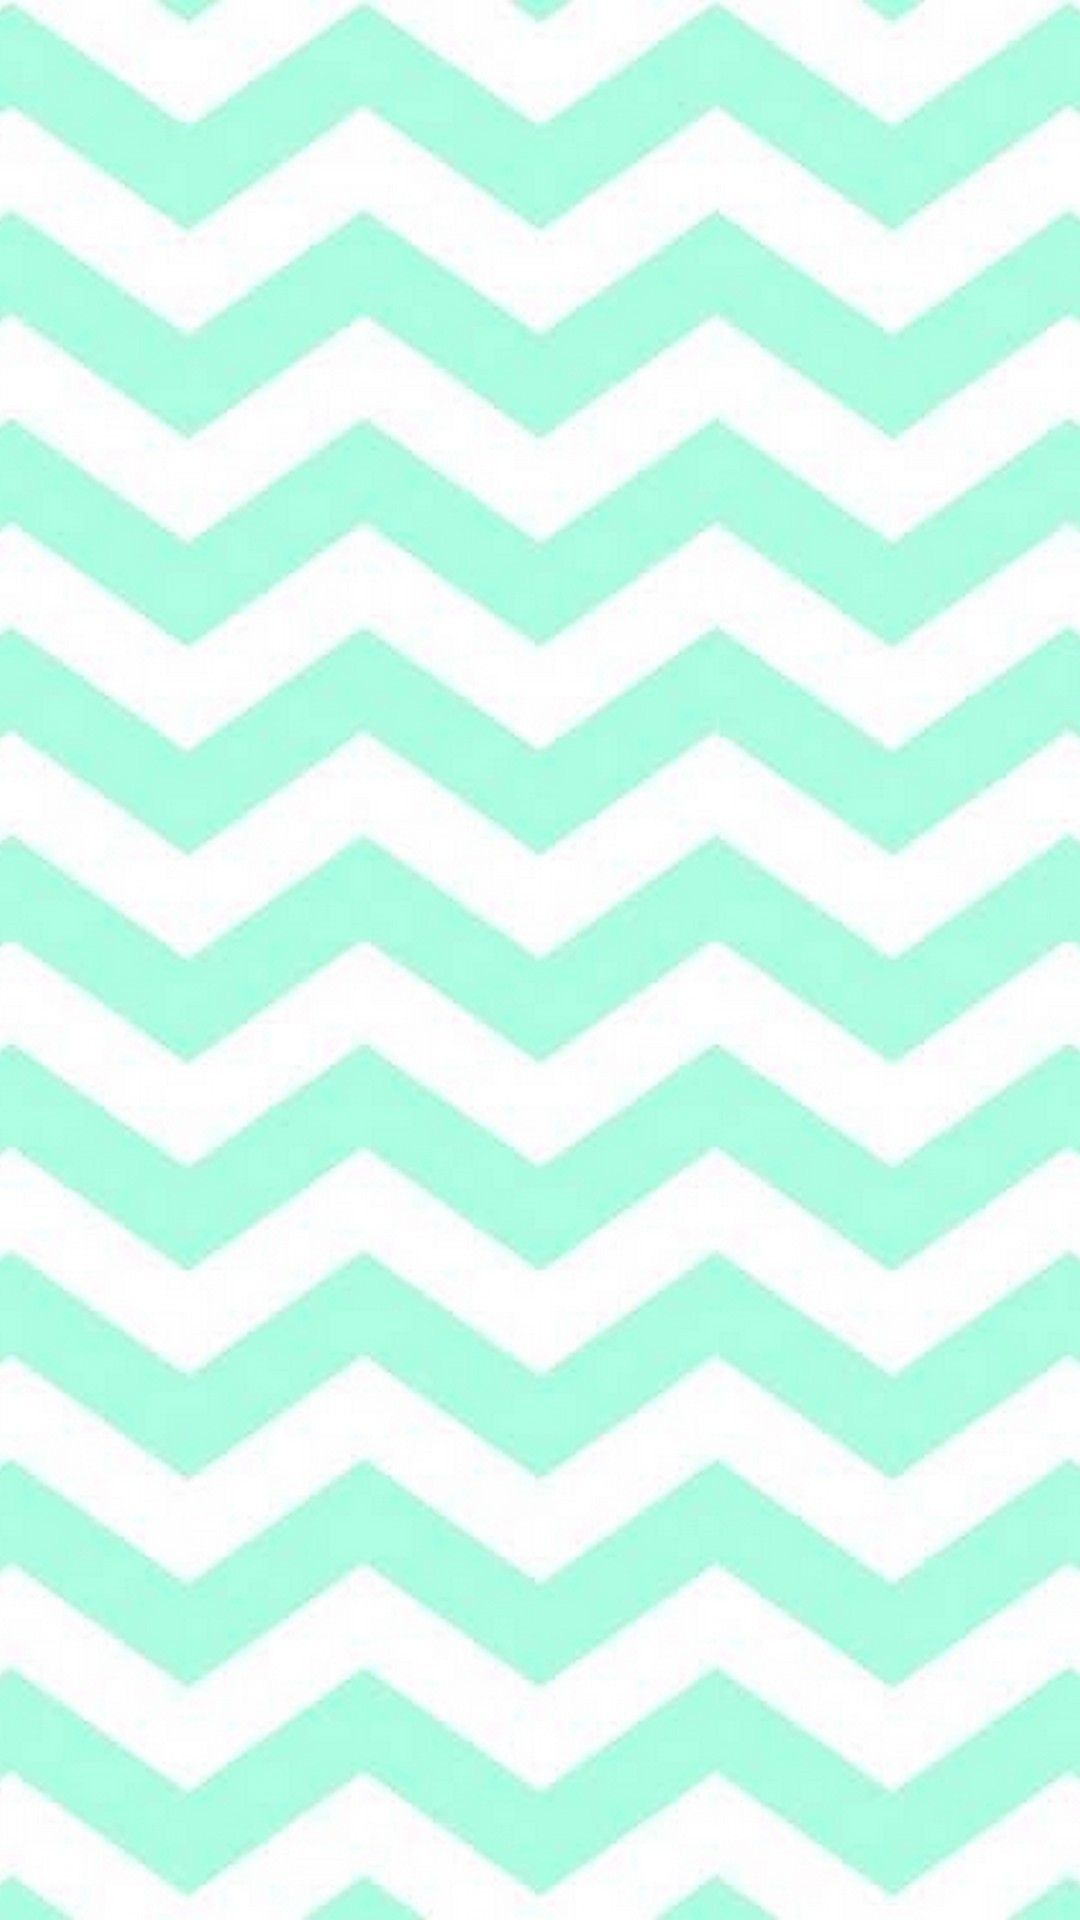 A seamless pattern of white and green zigzags - Mint green